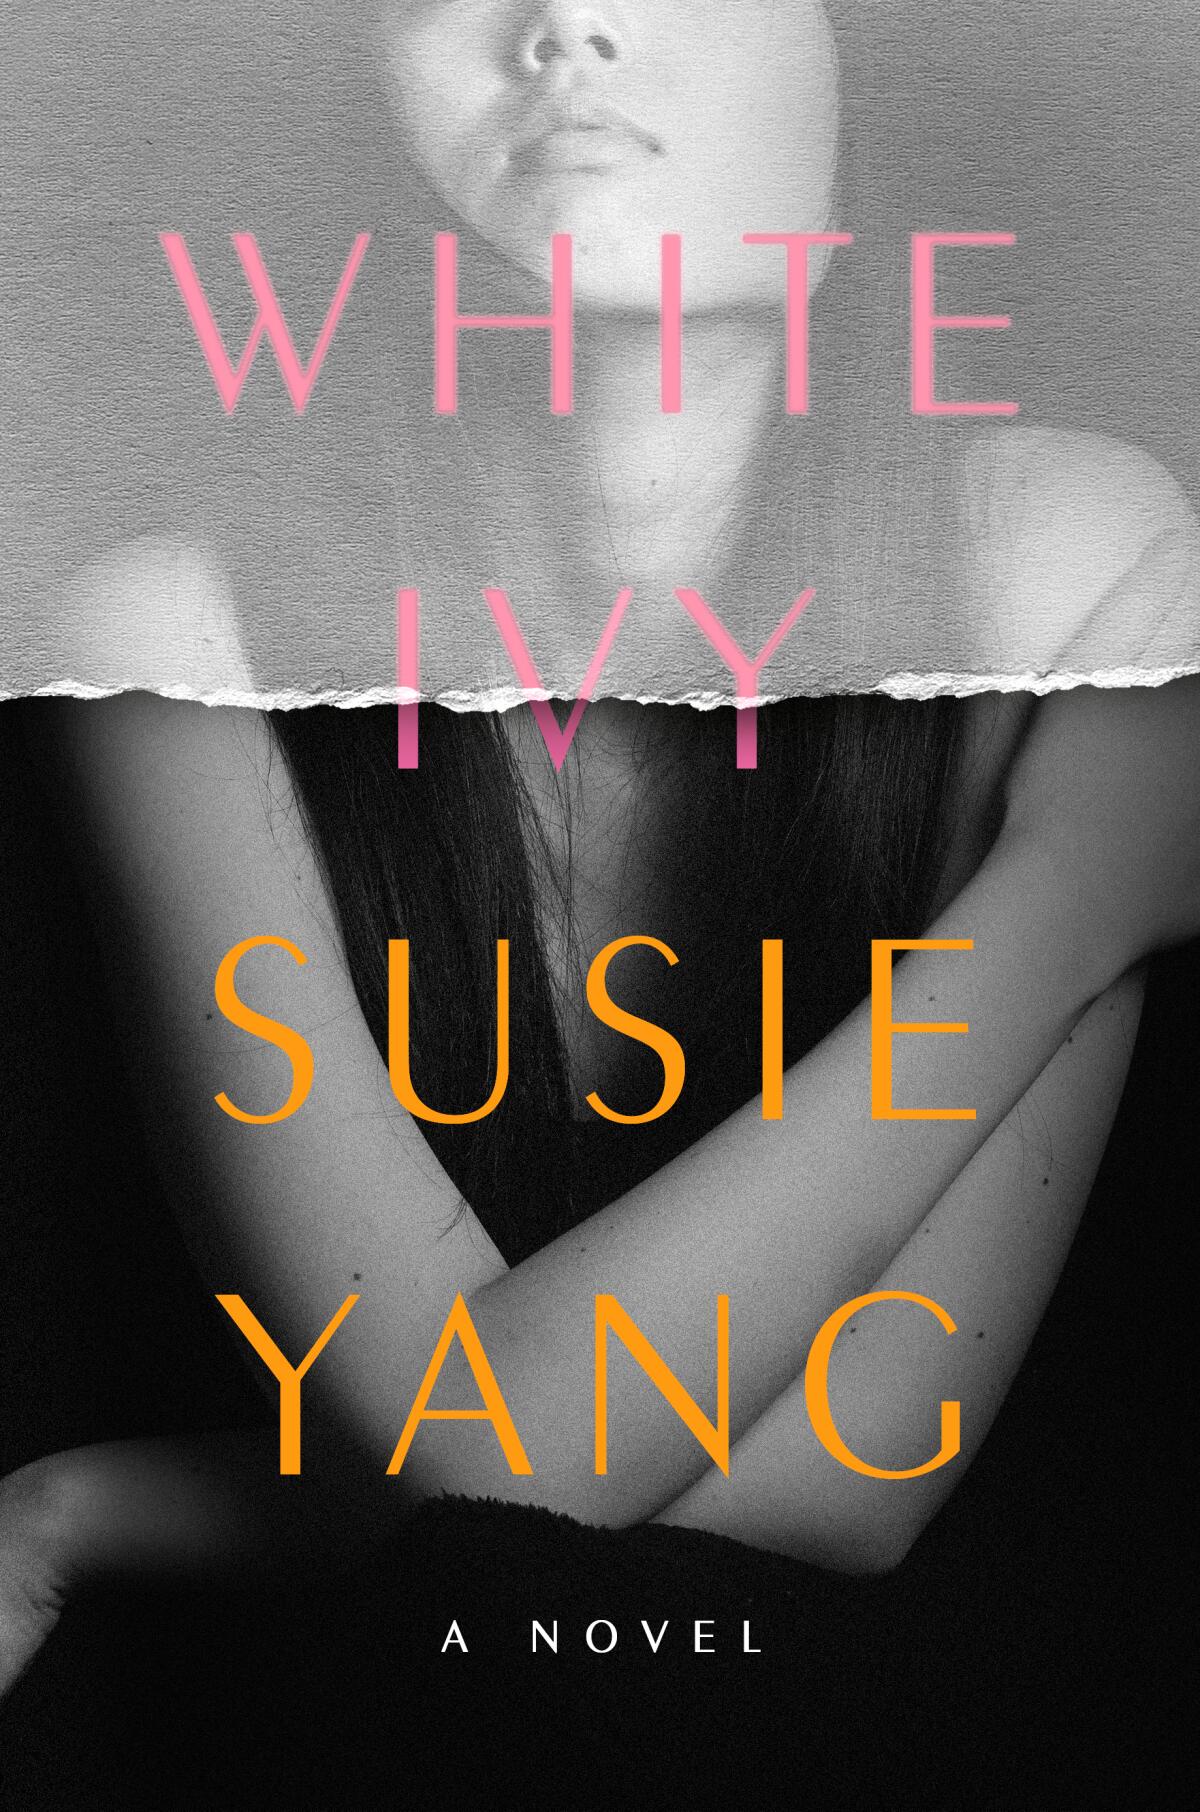 Book jacket for "White Ivy" By Susie Yang.